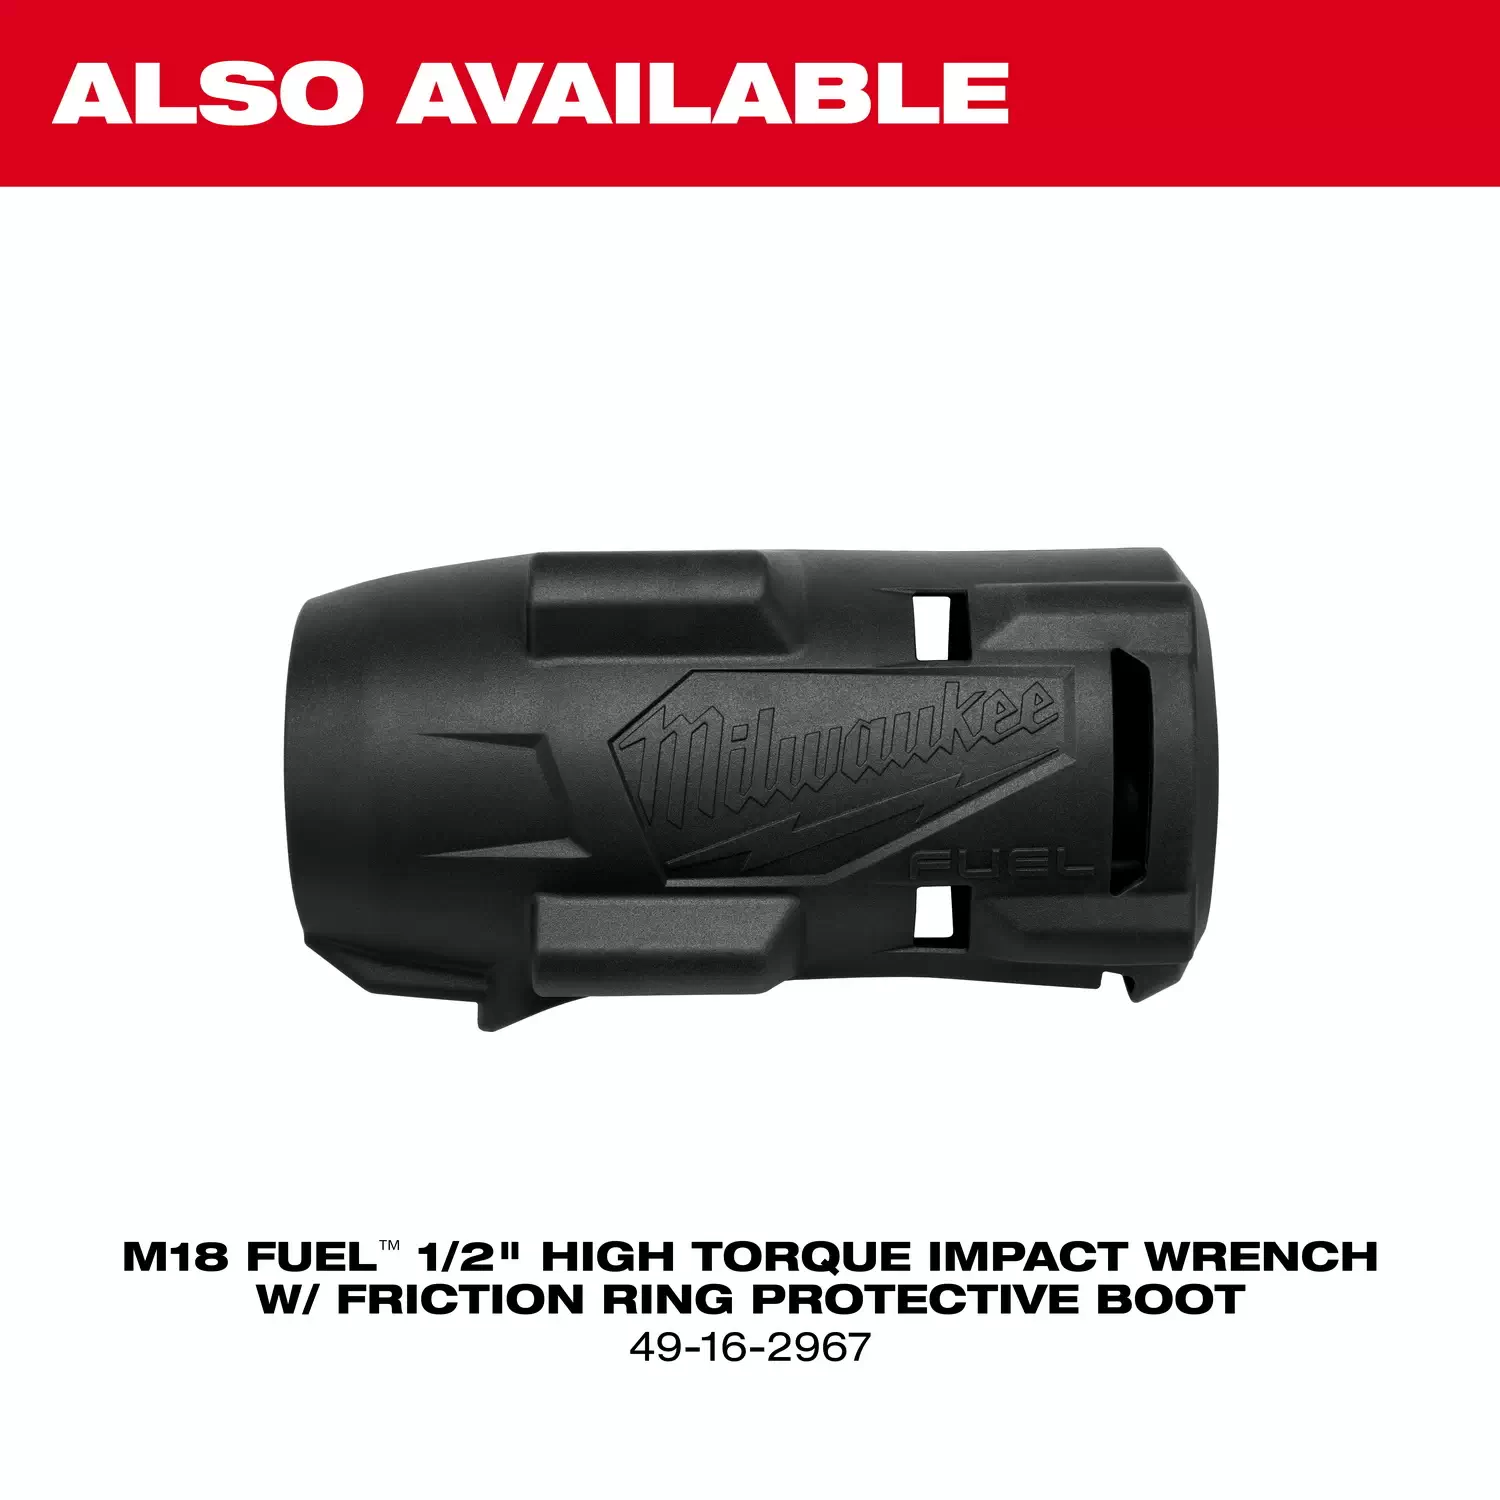 M18 FUEL 1/2 Mid-Torque Impact Wrench w/ Friction Ring